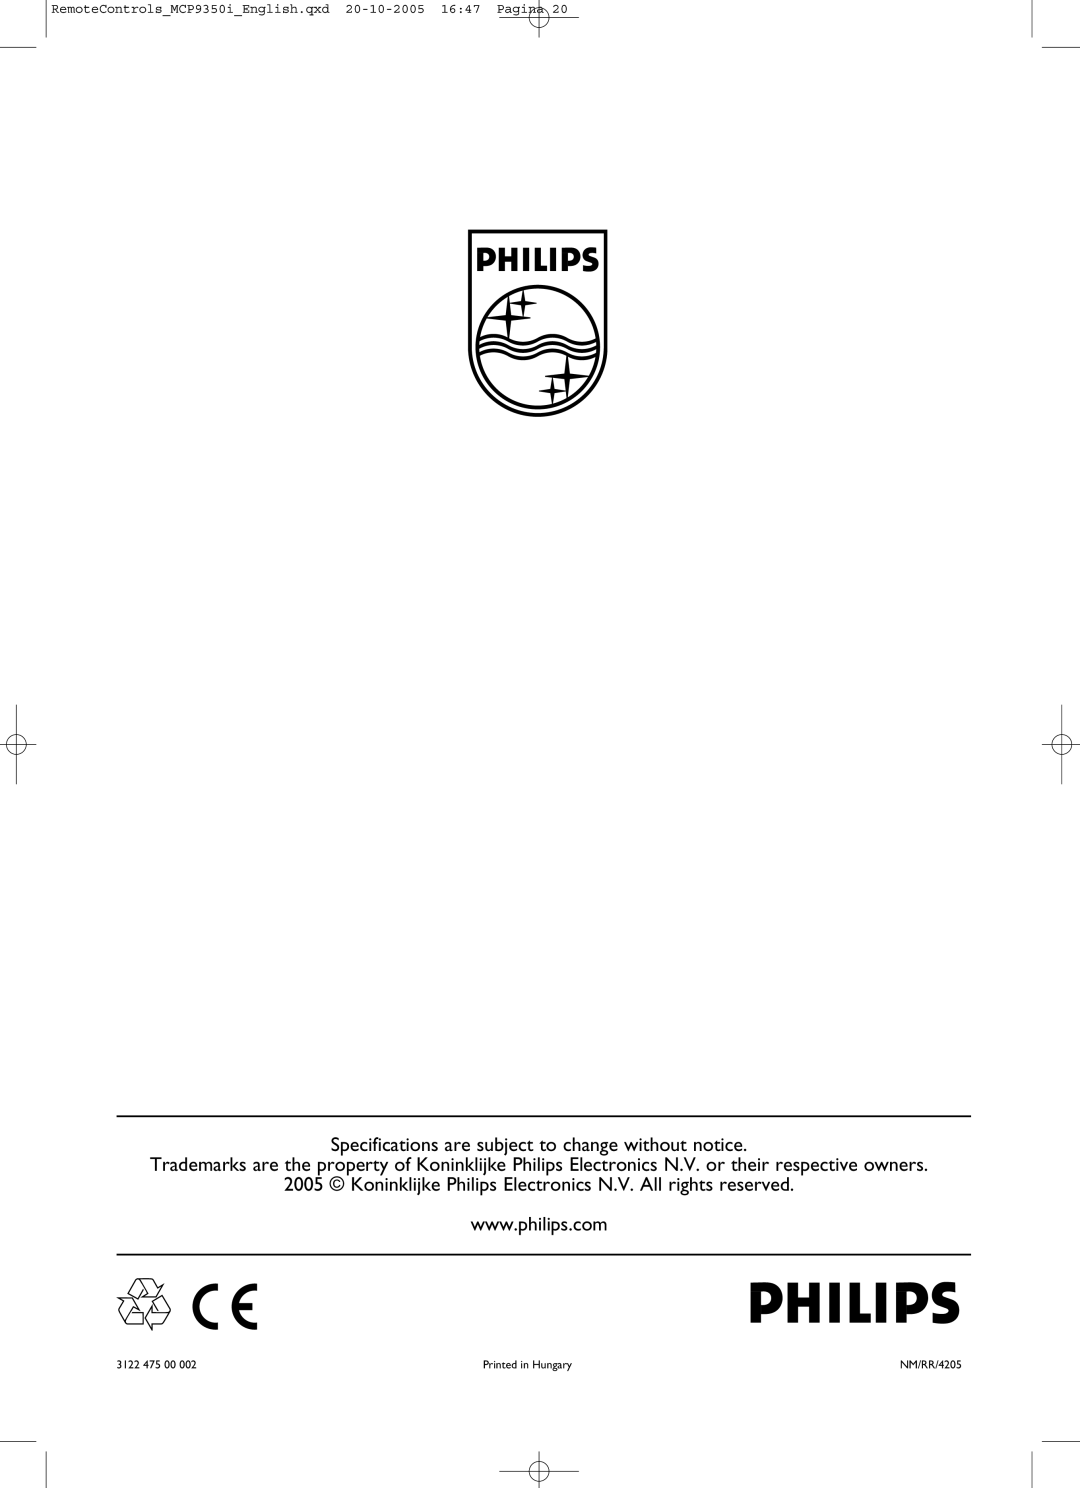 Philips RC4370 user manual Specifications are subject to change without notice, Printed in Hungary 